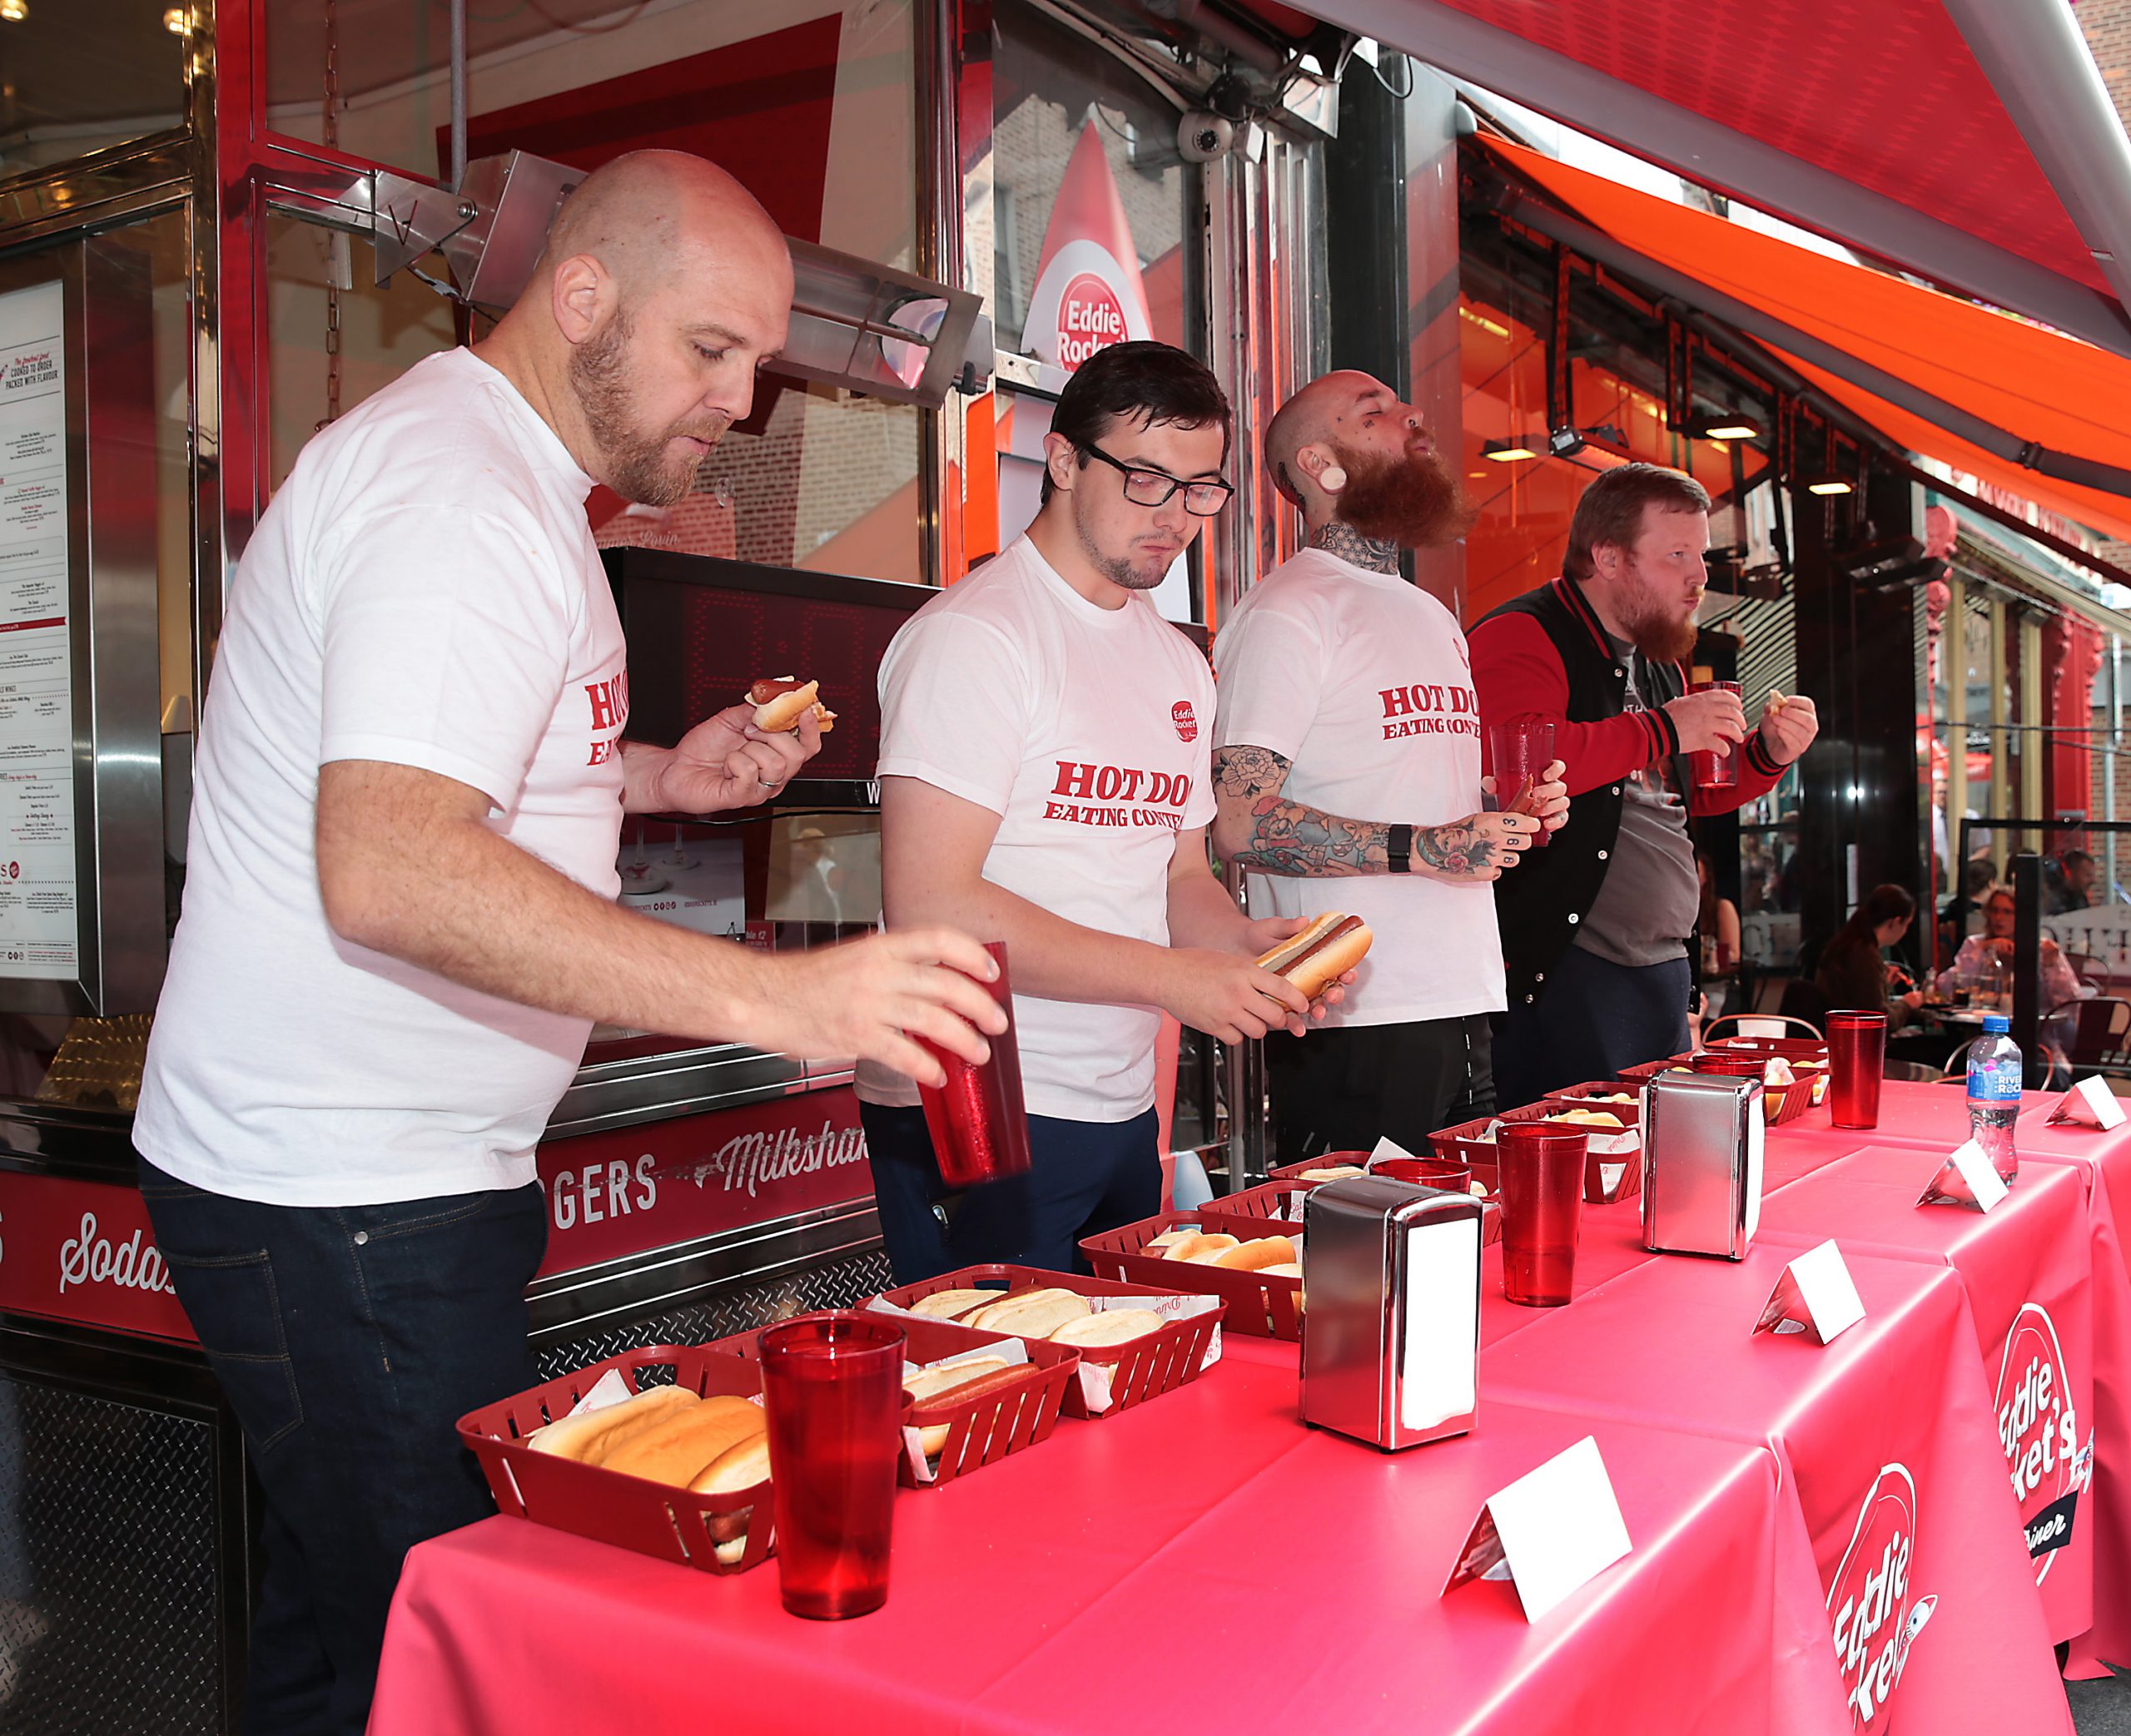 Dublin 7 bar to host Hot Ones style wing eating contest - Dublin's FM104